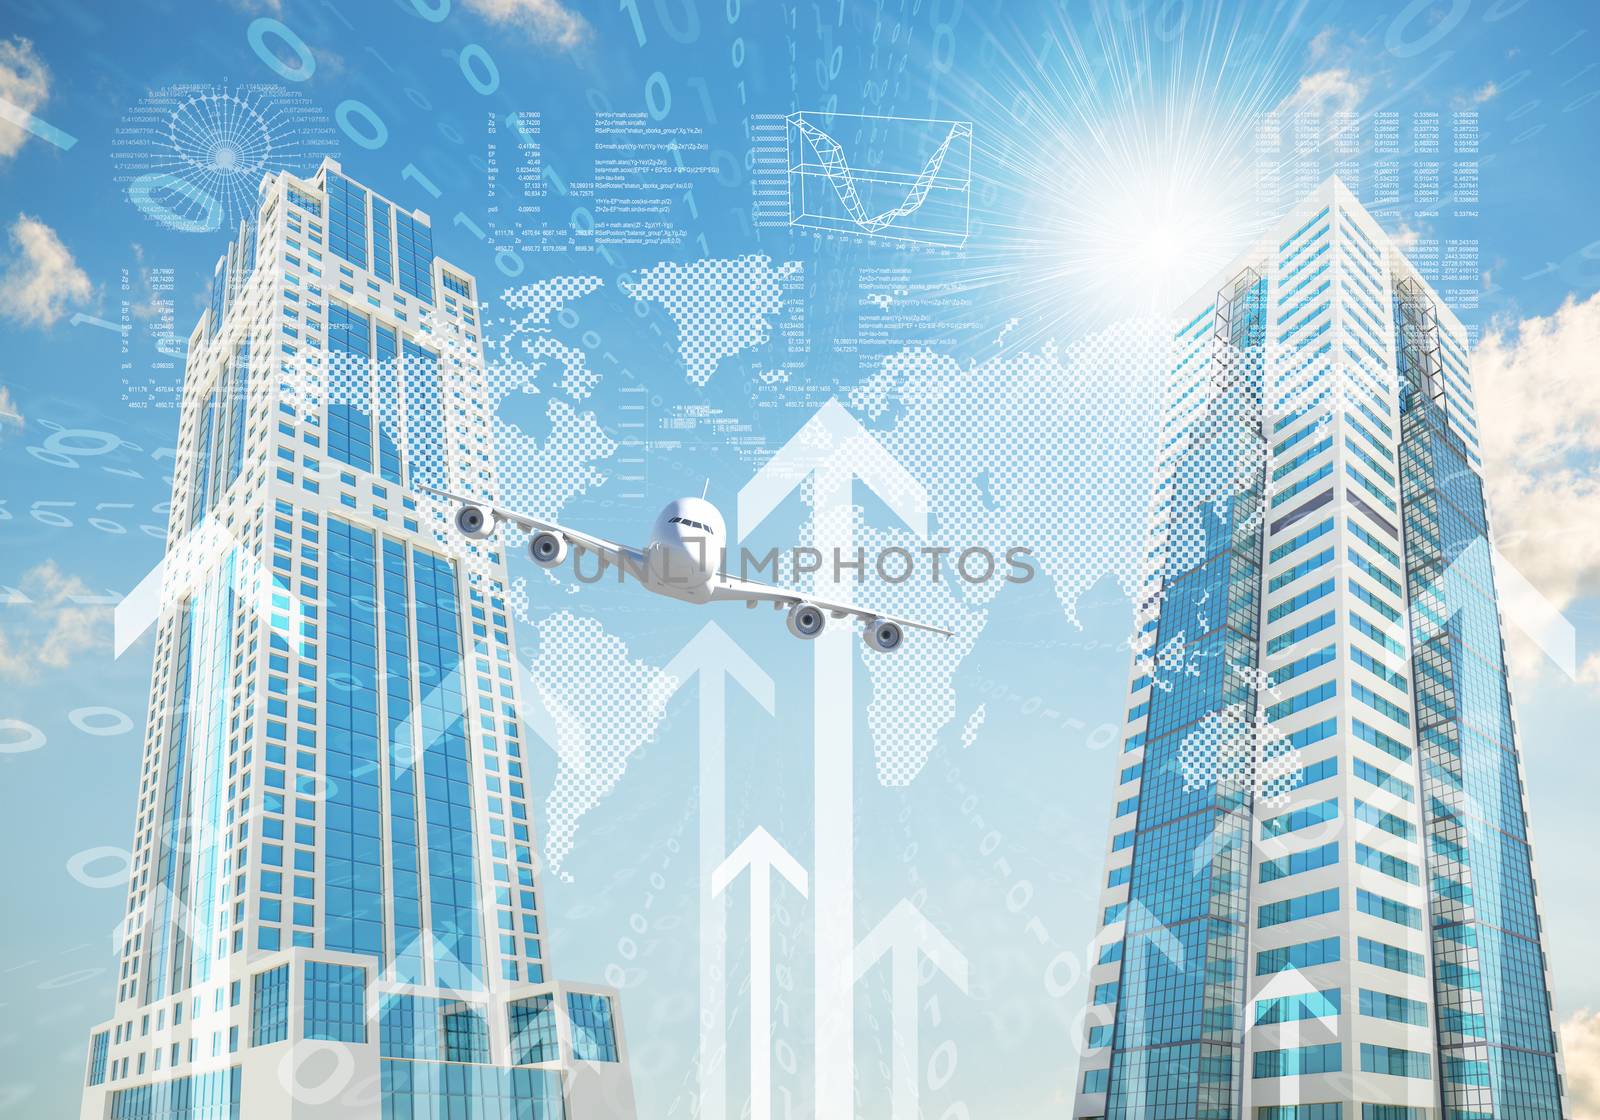 Airplane with background of skyscrapers and arrows by cherezoff